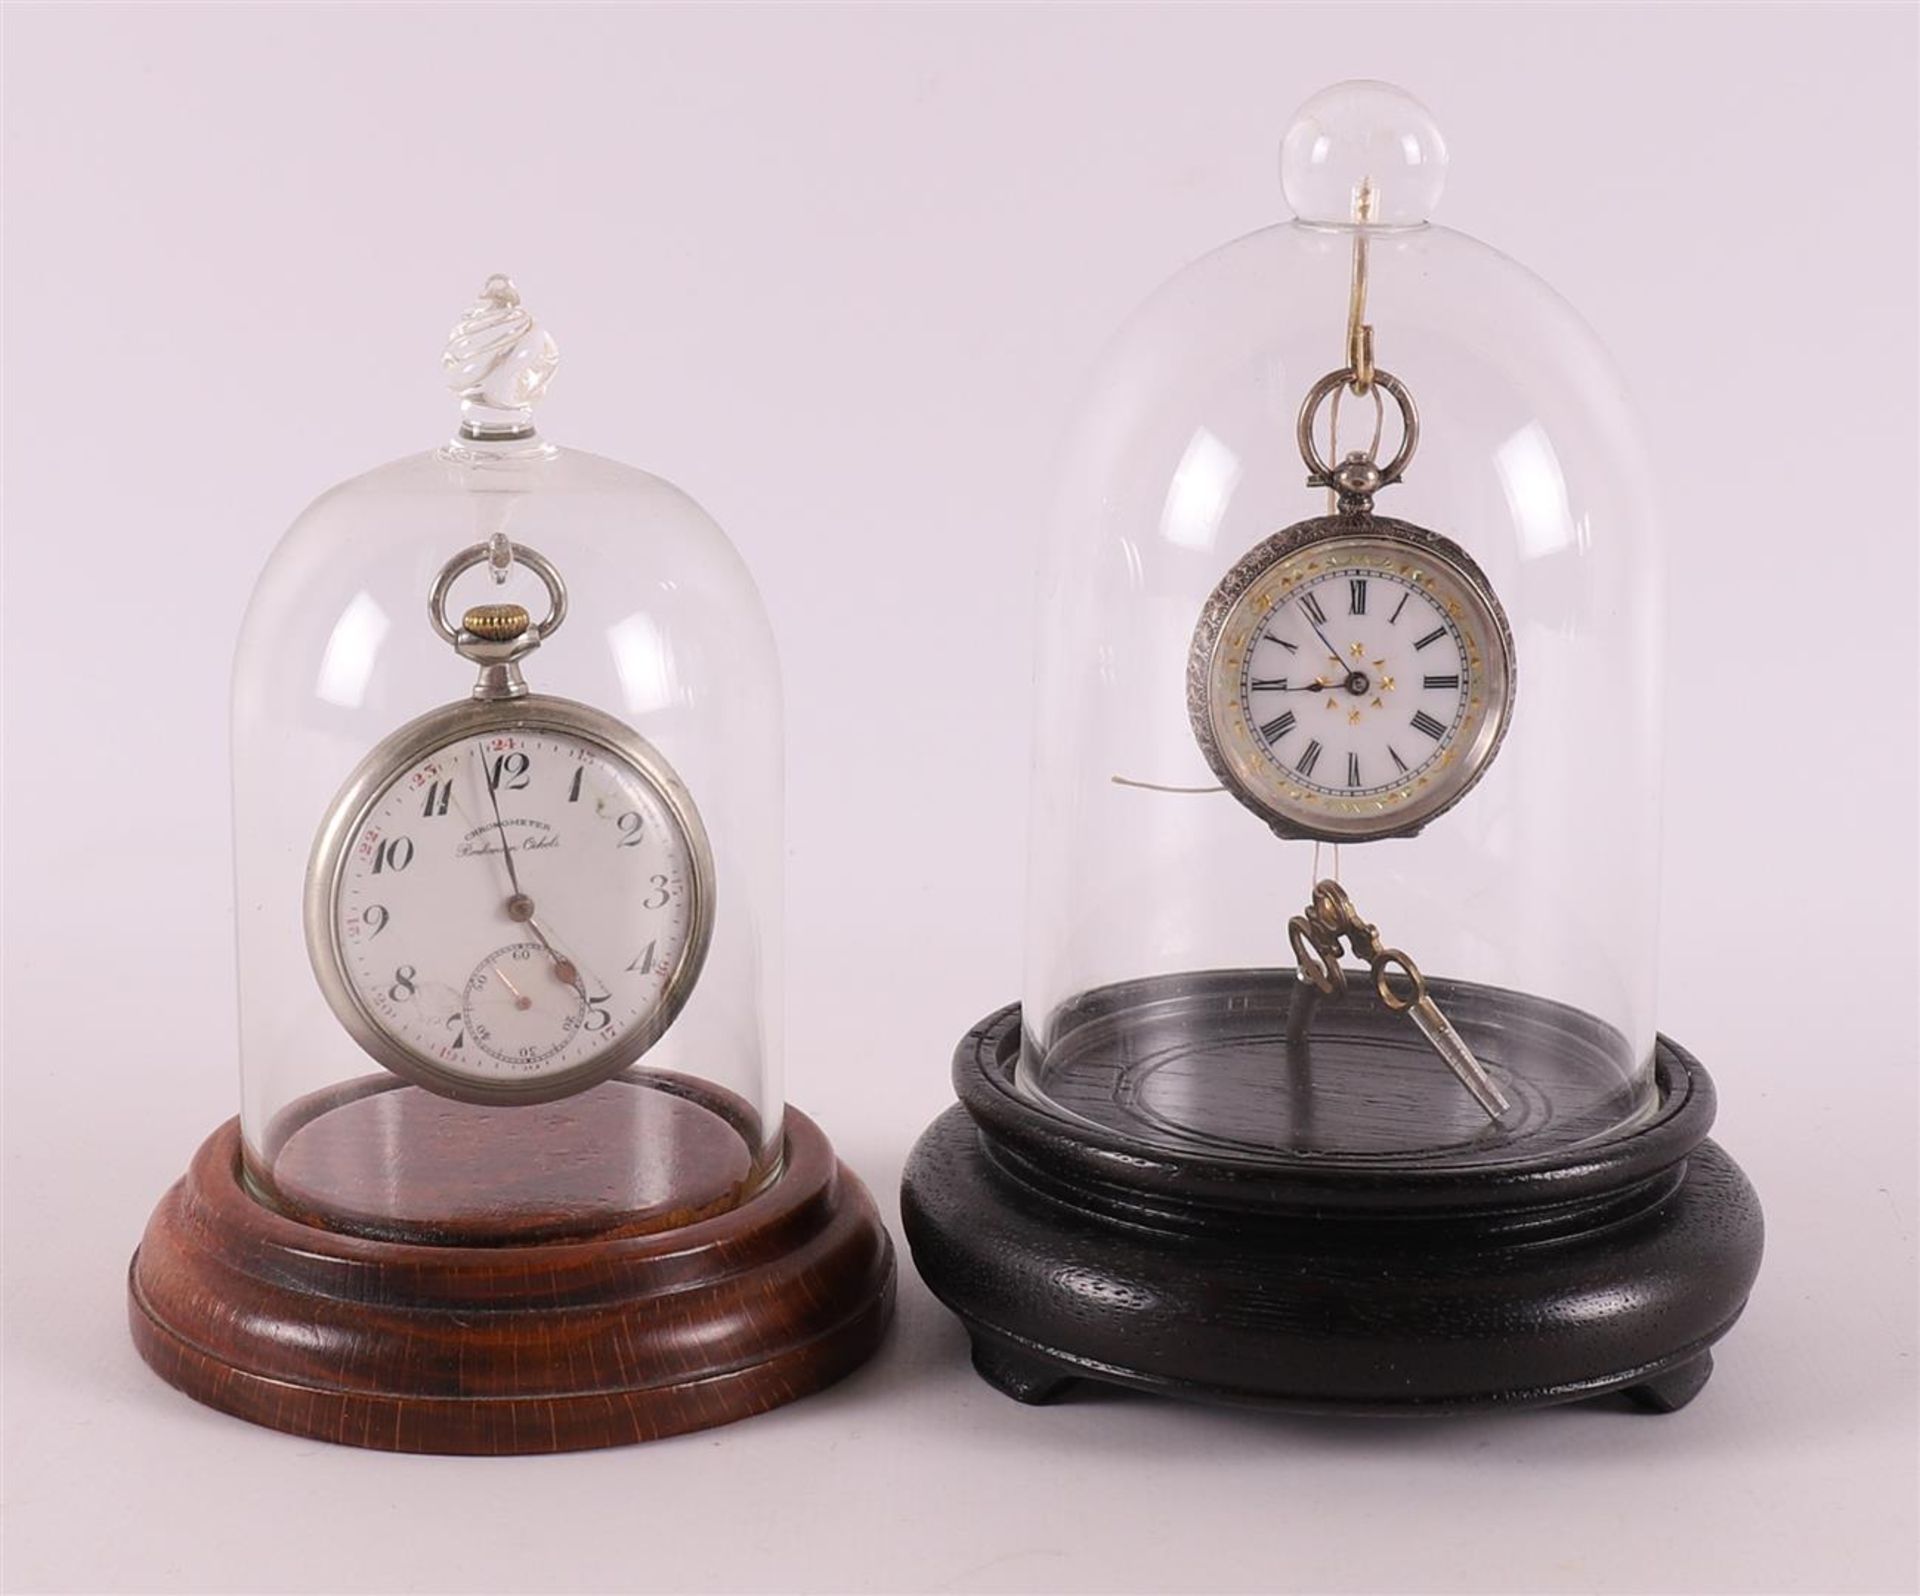 Two various men's vest pocket watches in silver cases, around 1900